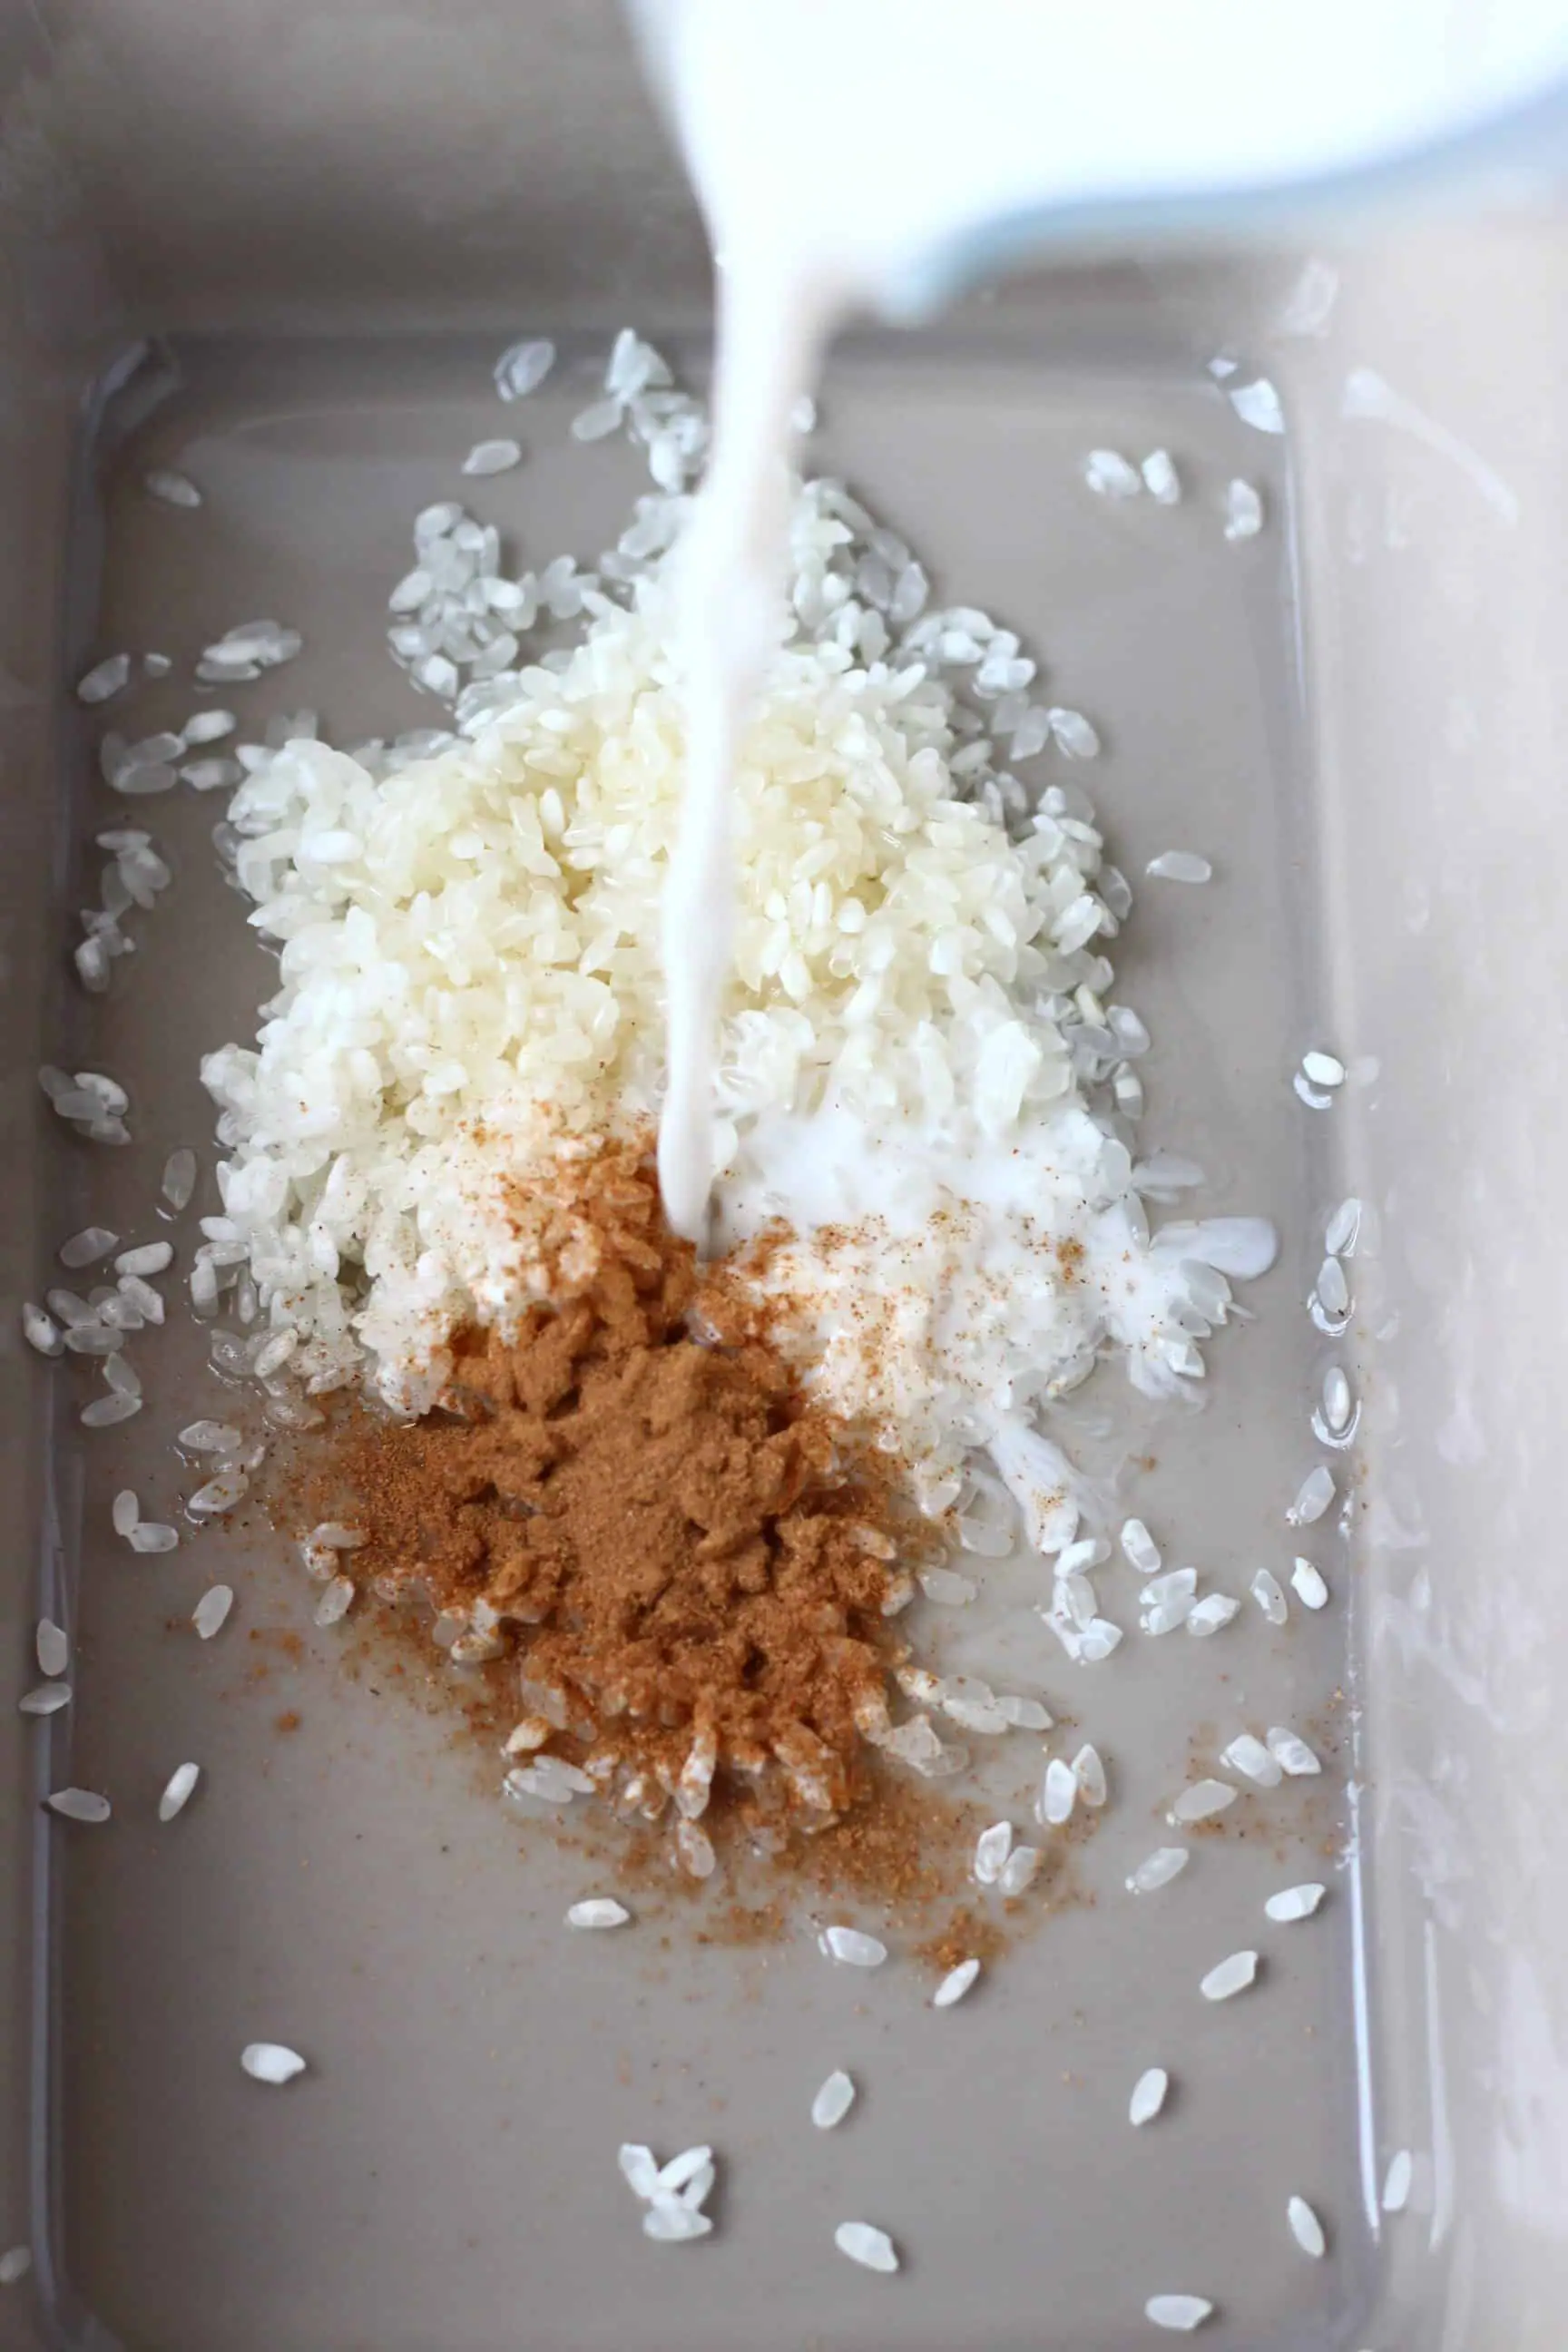 Ground cinnamon and uncooked rice in a grey baking tray with milk being poured into it in a jug